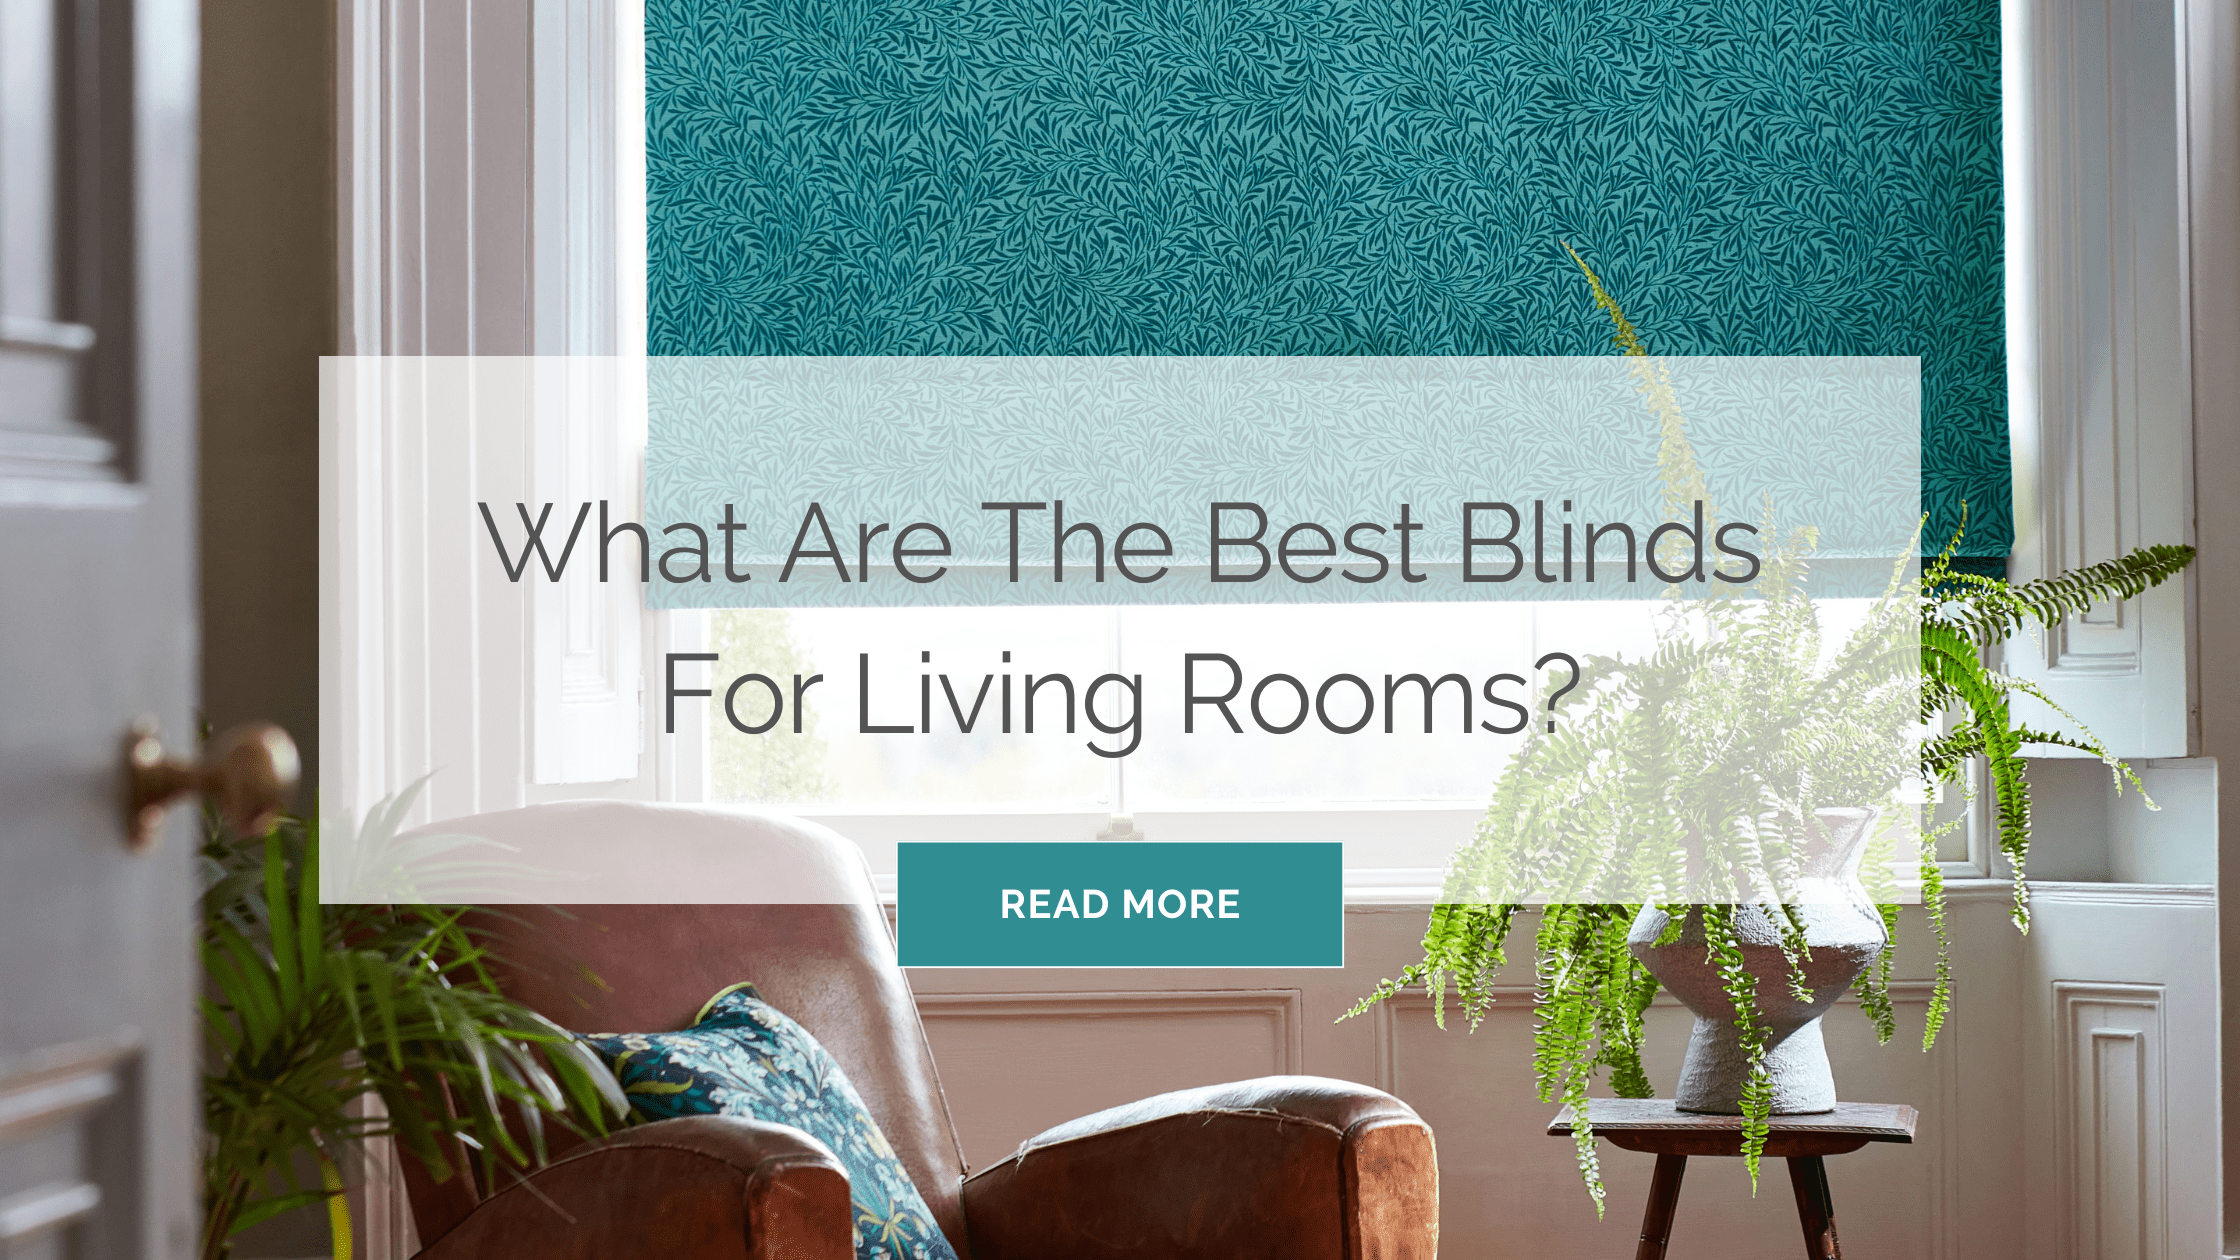 Best blinds for living rooms